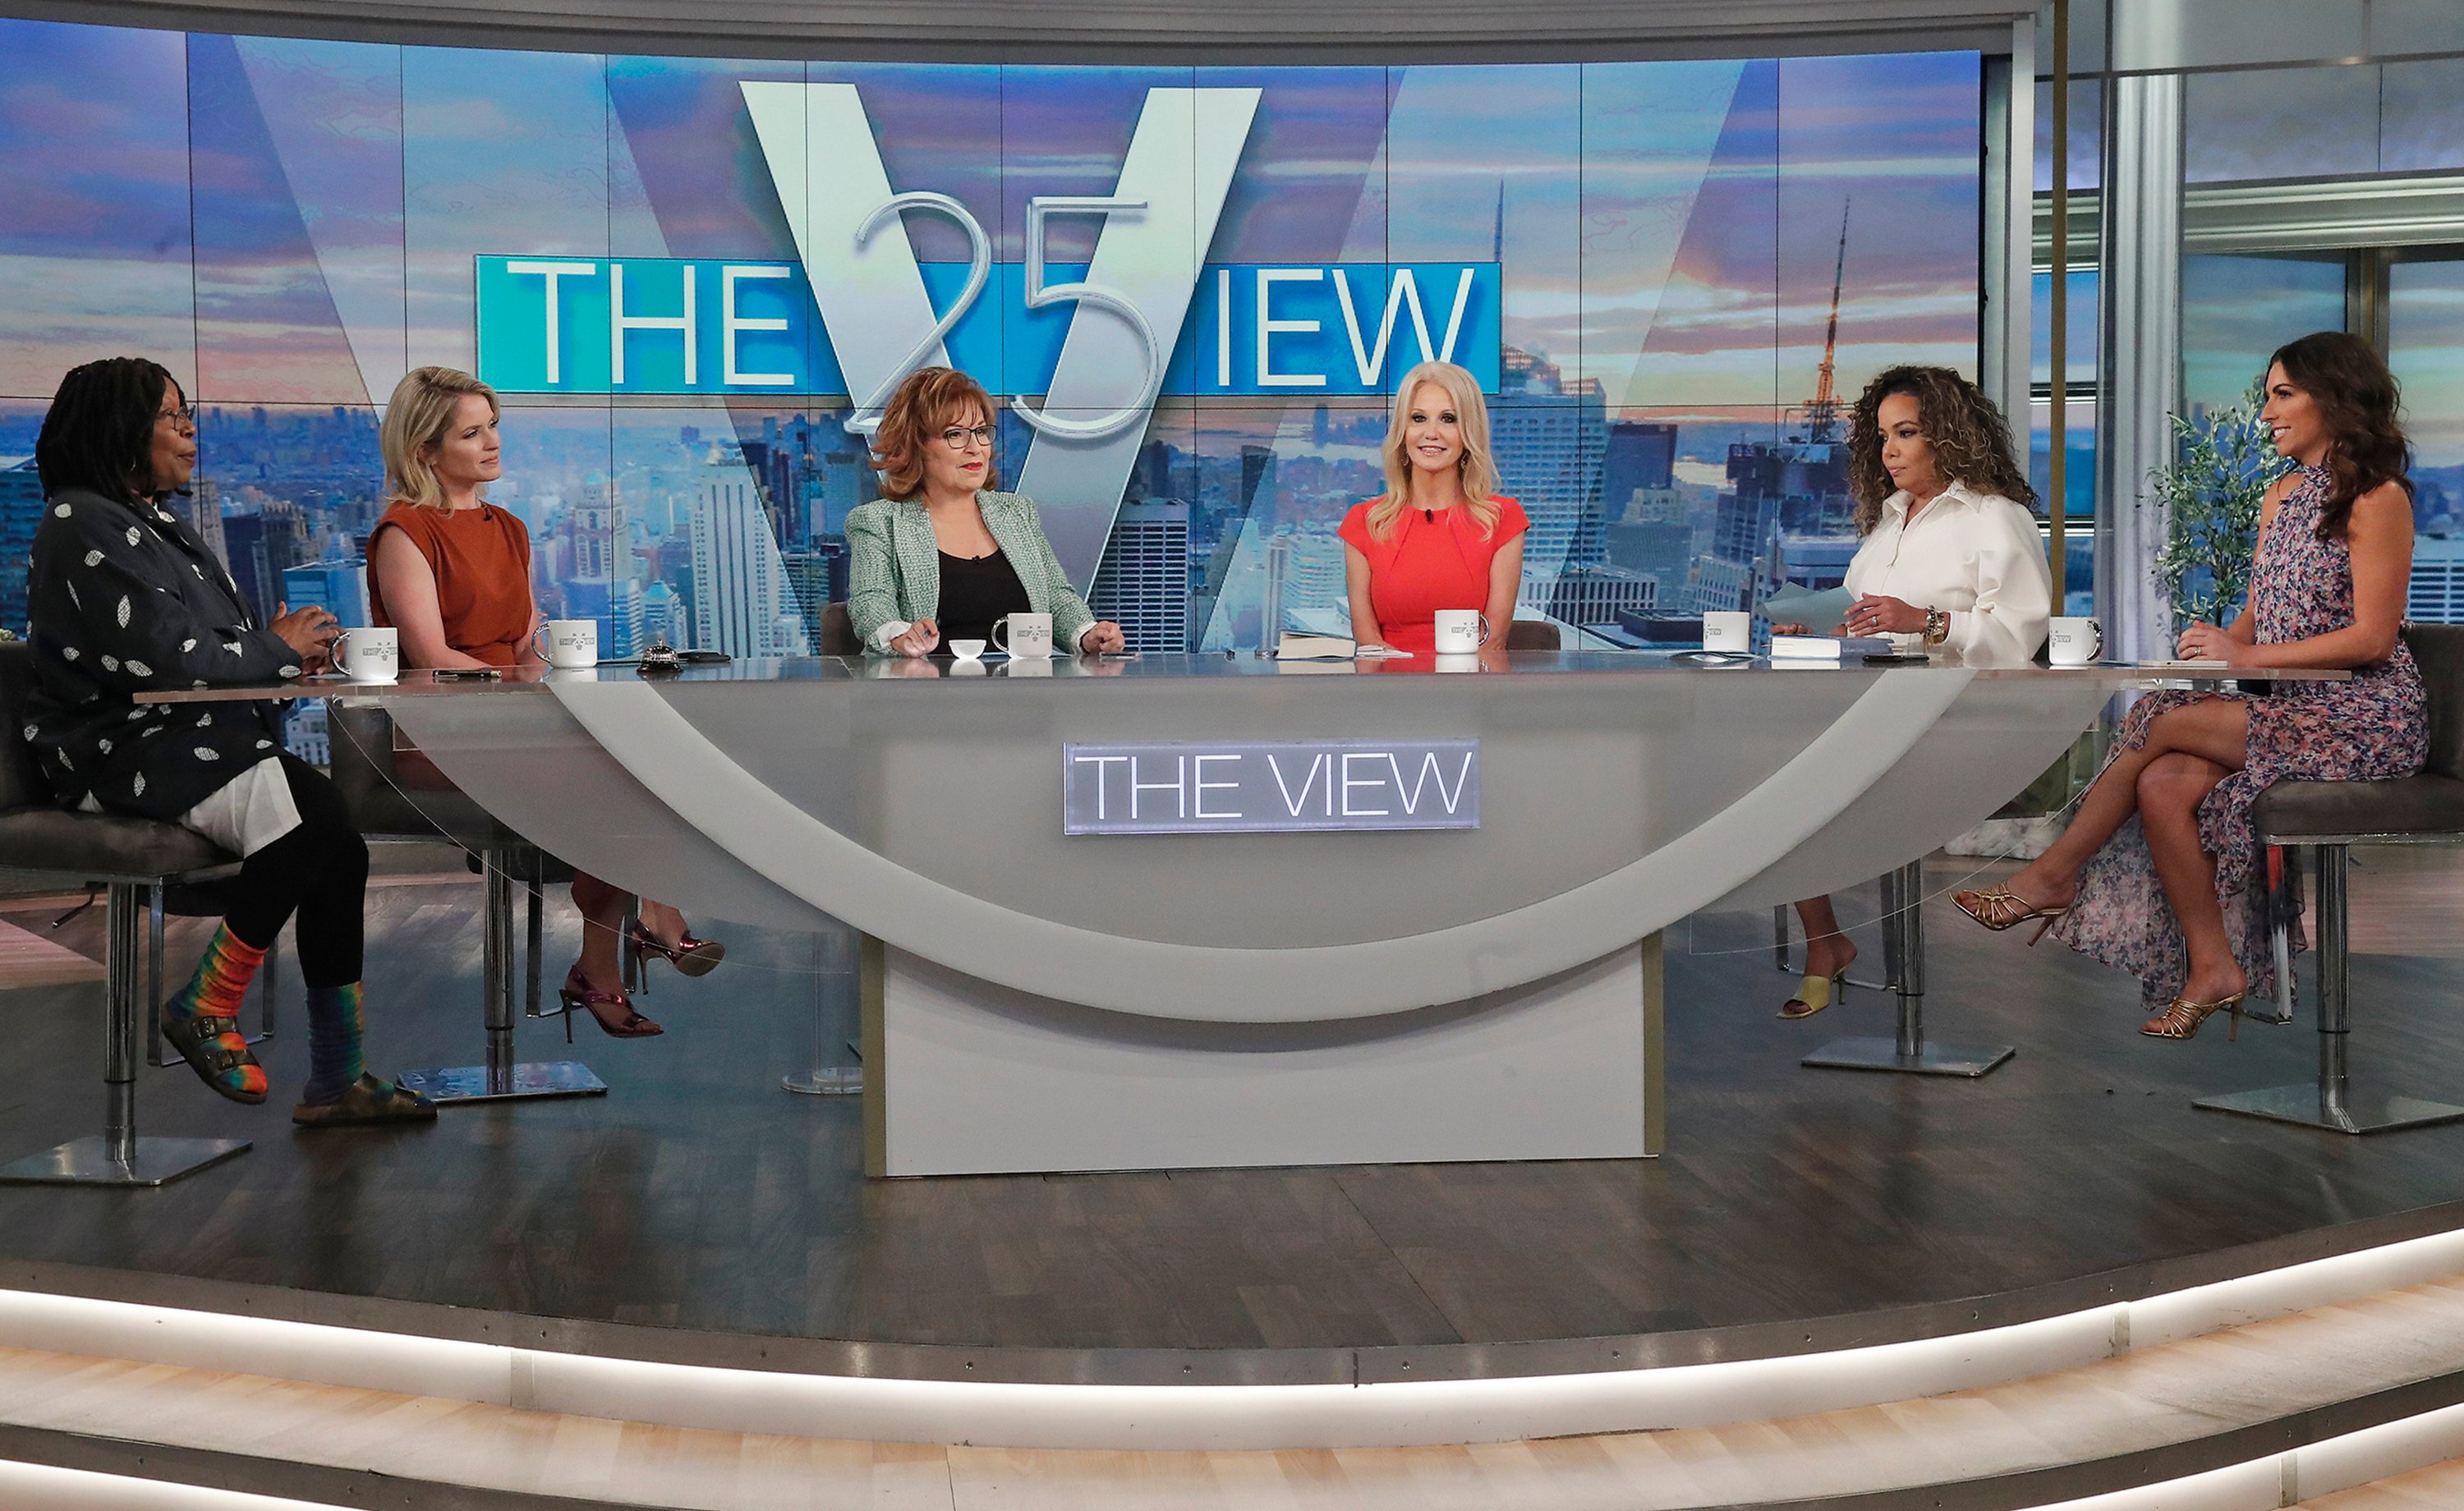 'The View' panelists welcome Kellyanne Conway to the Hot Topics Table. Pictured are Whoopi Goldberg, Sara Haines, Joy Behar, Sunny Hostin, and Alysse Farah Griffin.